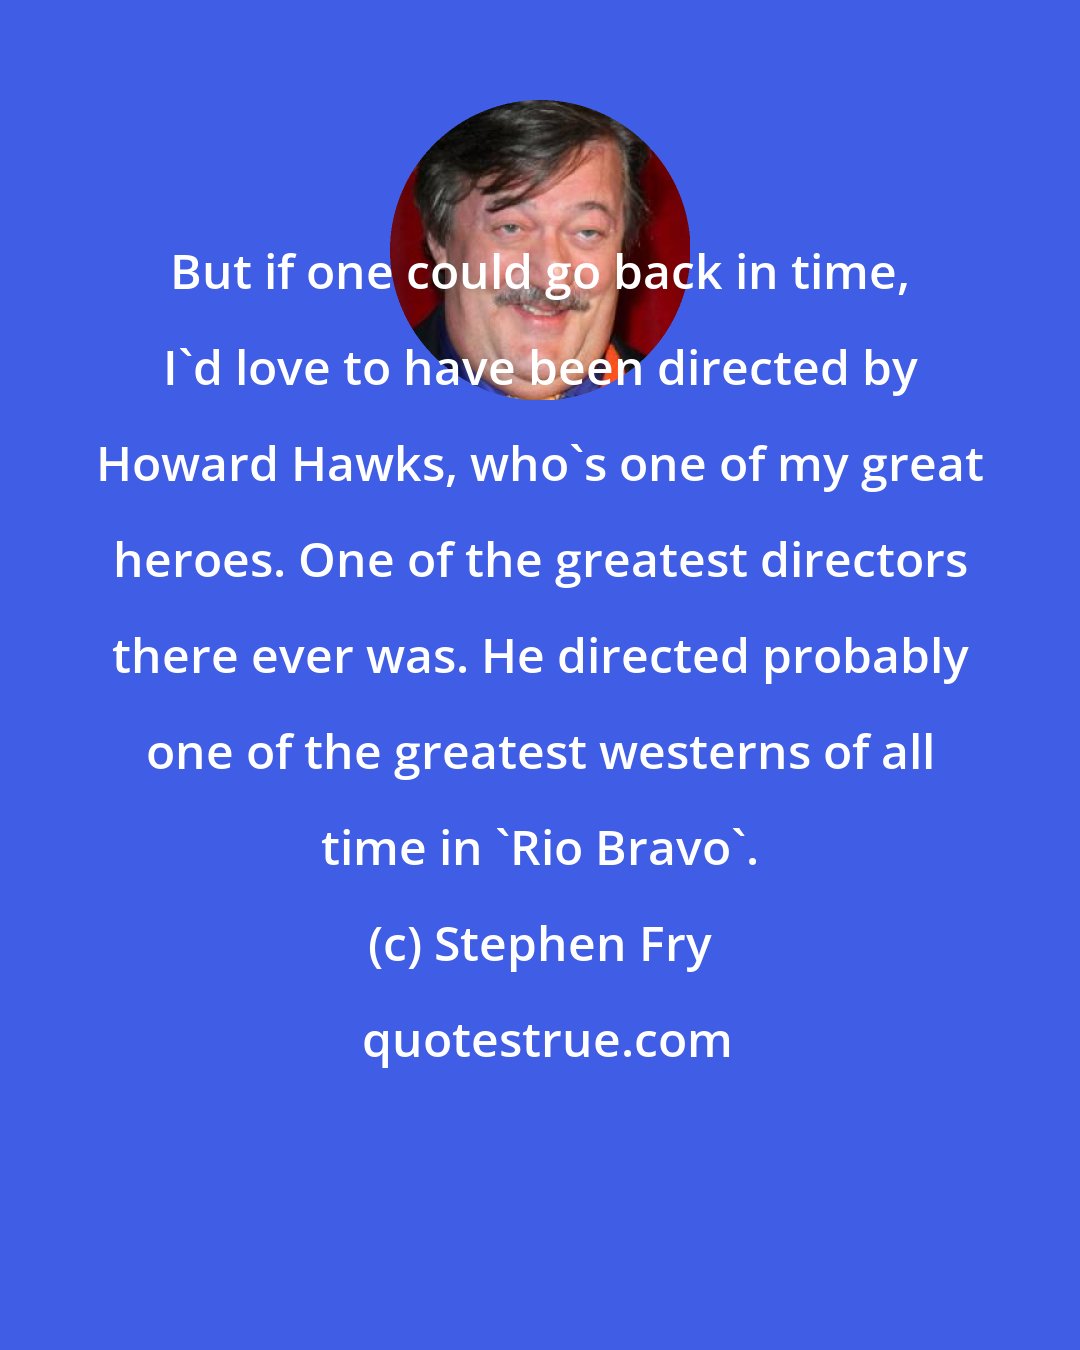 Stephen Fry: But if one could go back in time, I'd love to have been directed by Howard Hawks, who's one of my great heroes. One of the greatest directors there ever was. He directed probably one of the greatest westerns of all time in 'Rio Bravo'.